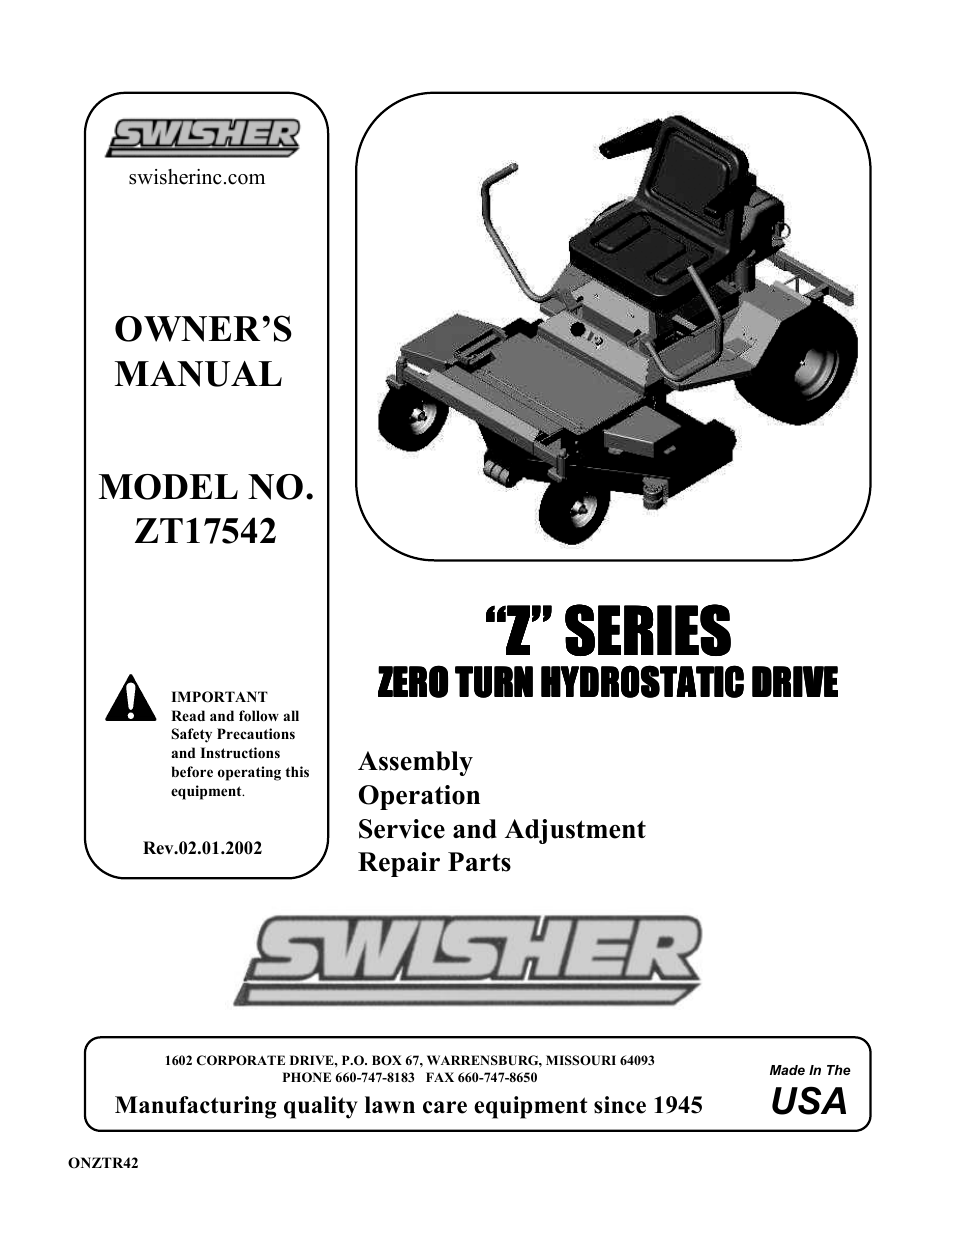 Swisher ZT17542 User Manual | 24 pages | Original mode